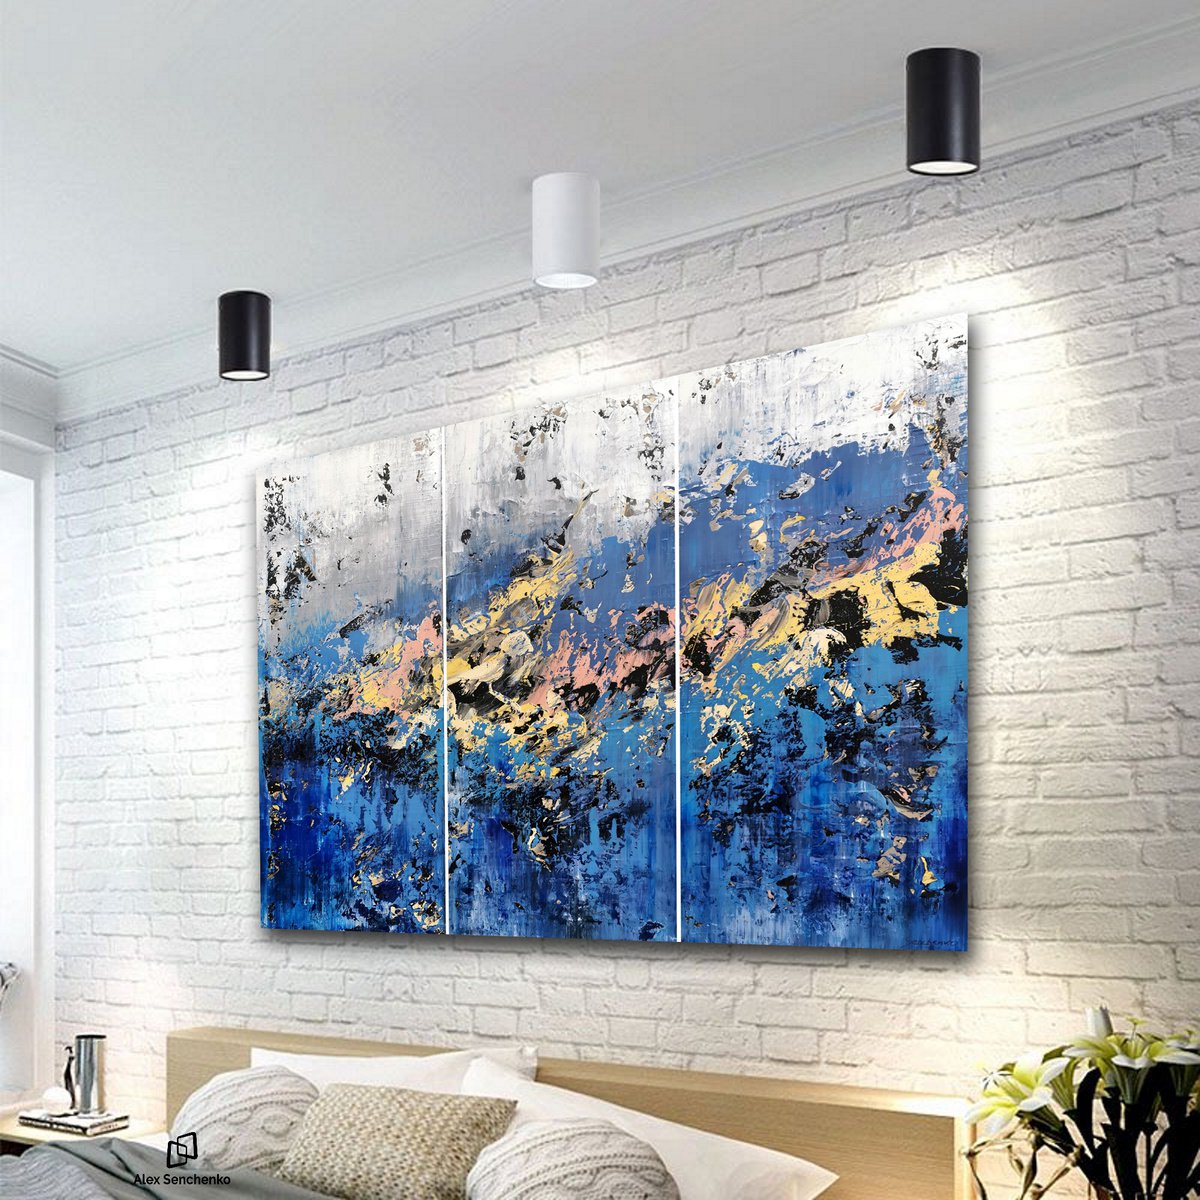 150x100cm. / Abstract triptych / Abstract 2153 by Alex Senchenko